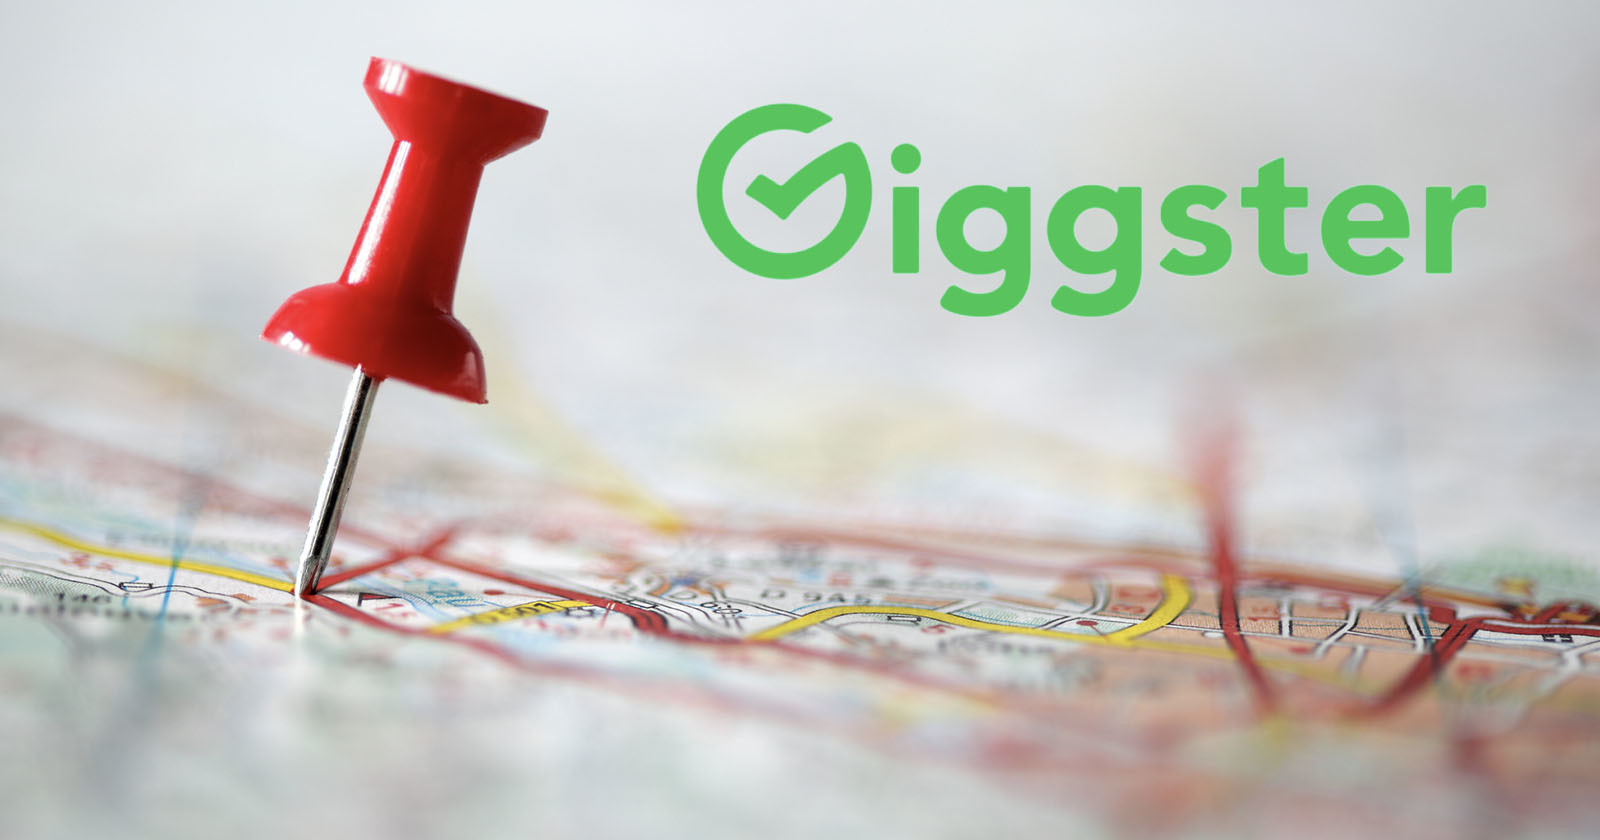 Giggster Helps Photographers and Filmmakers Find Locations for Shoots